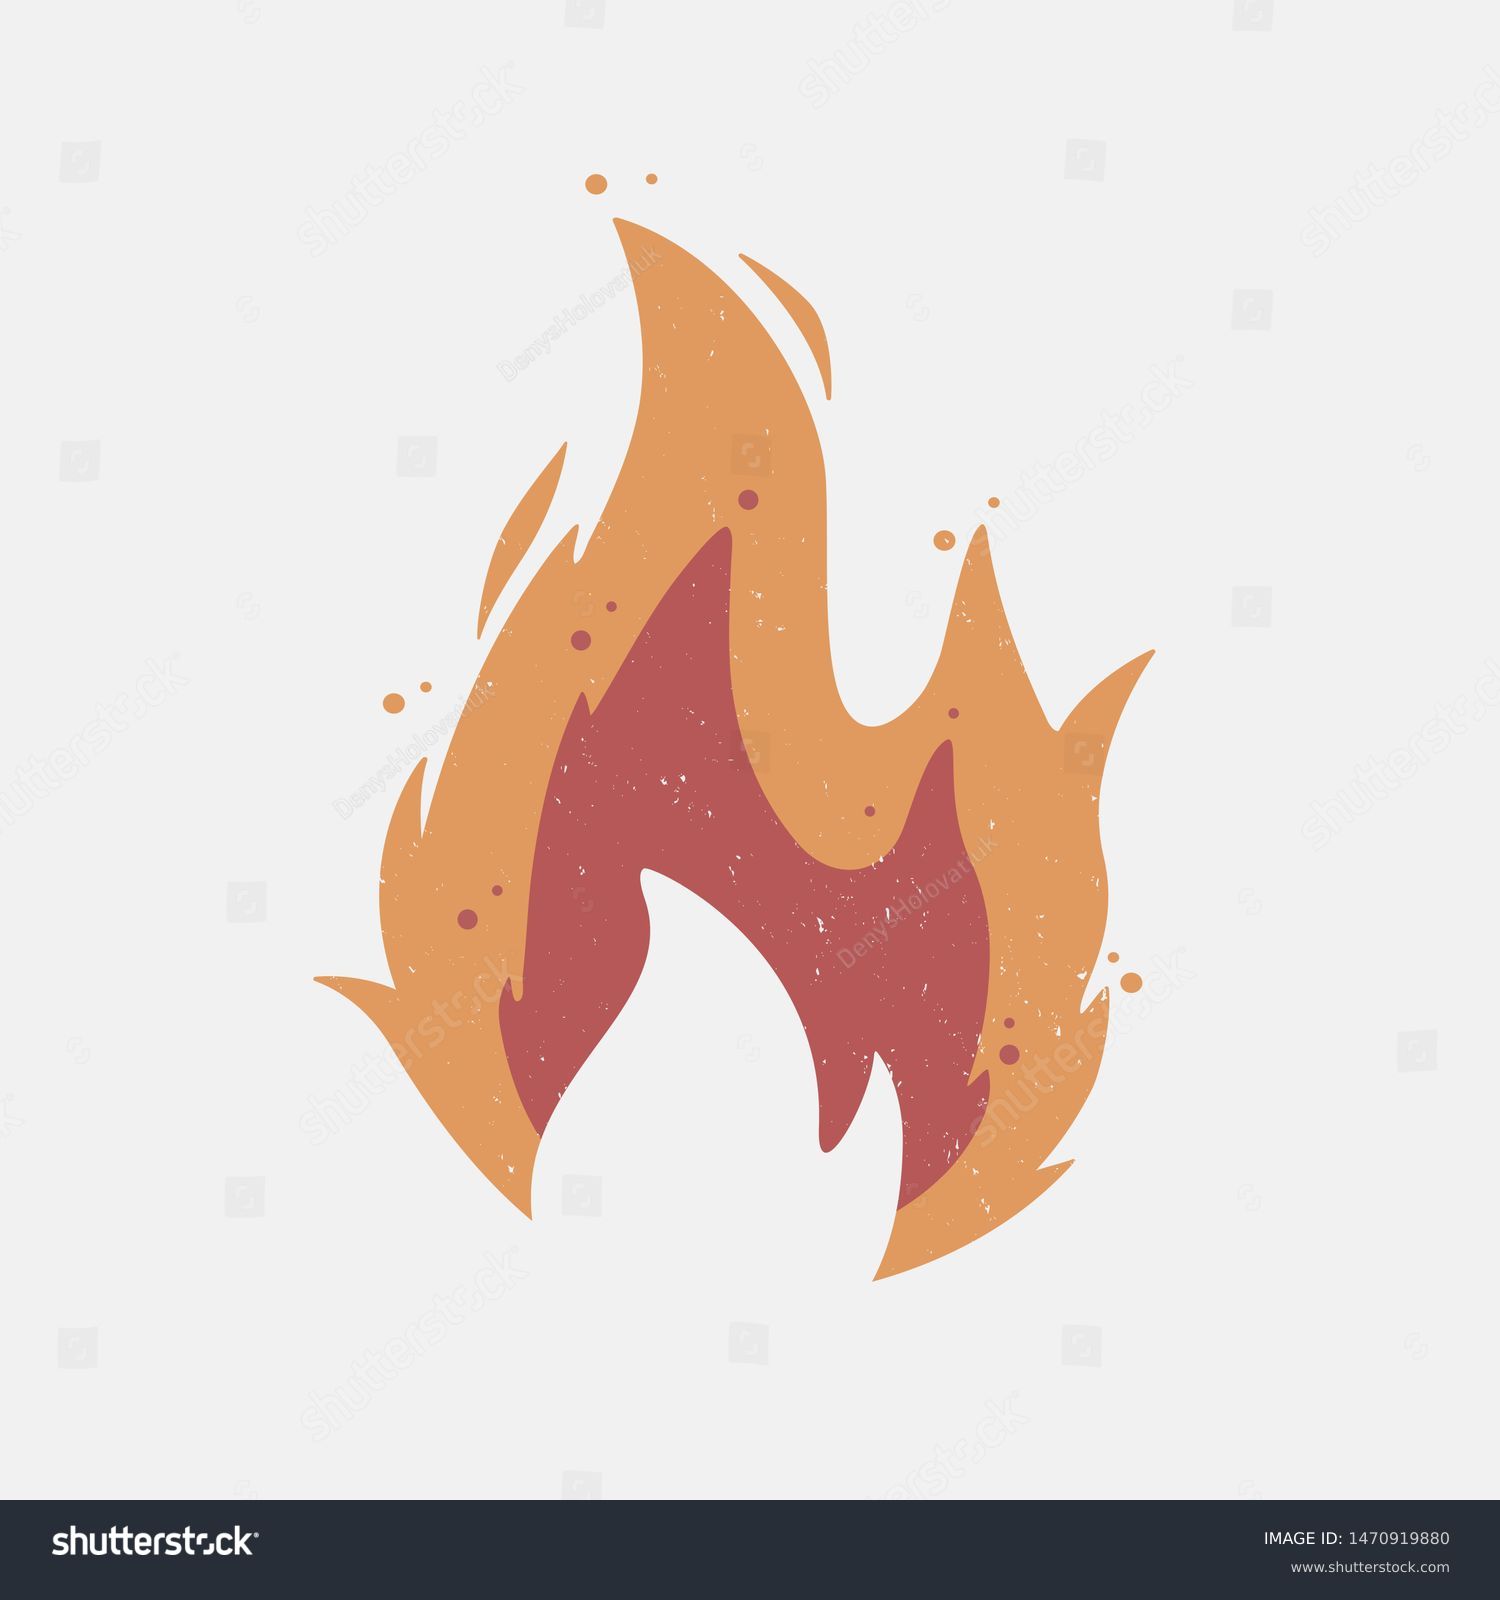 Fire flame icon with grunge texture. Vintage hipster fire flame logo, label, badge. Vector illustration. #1470919880